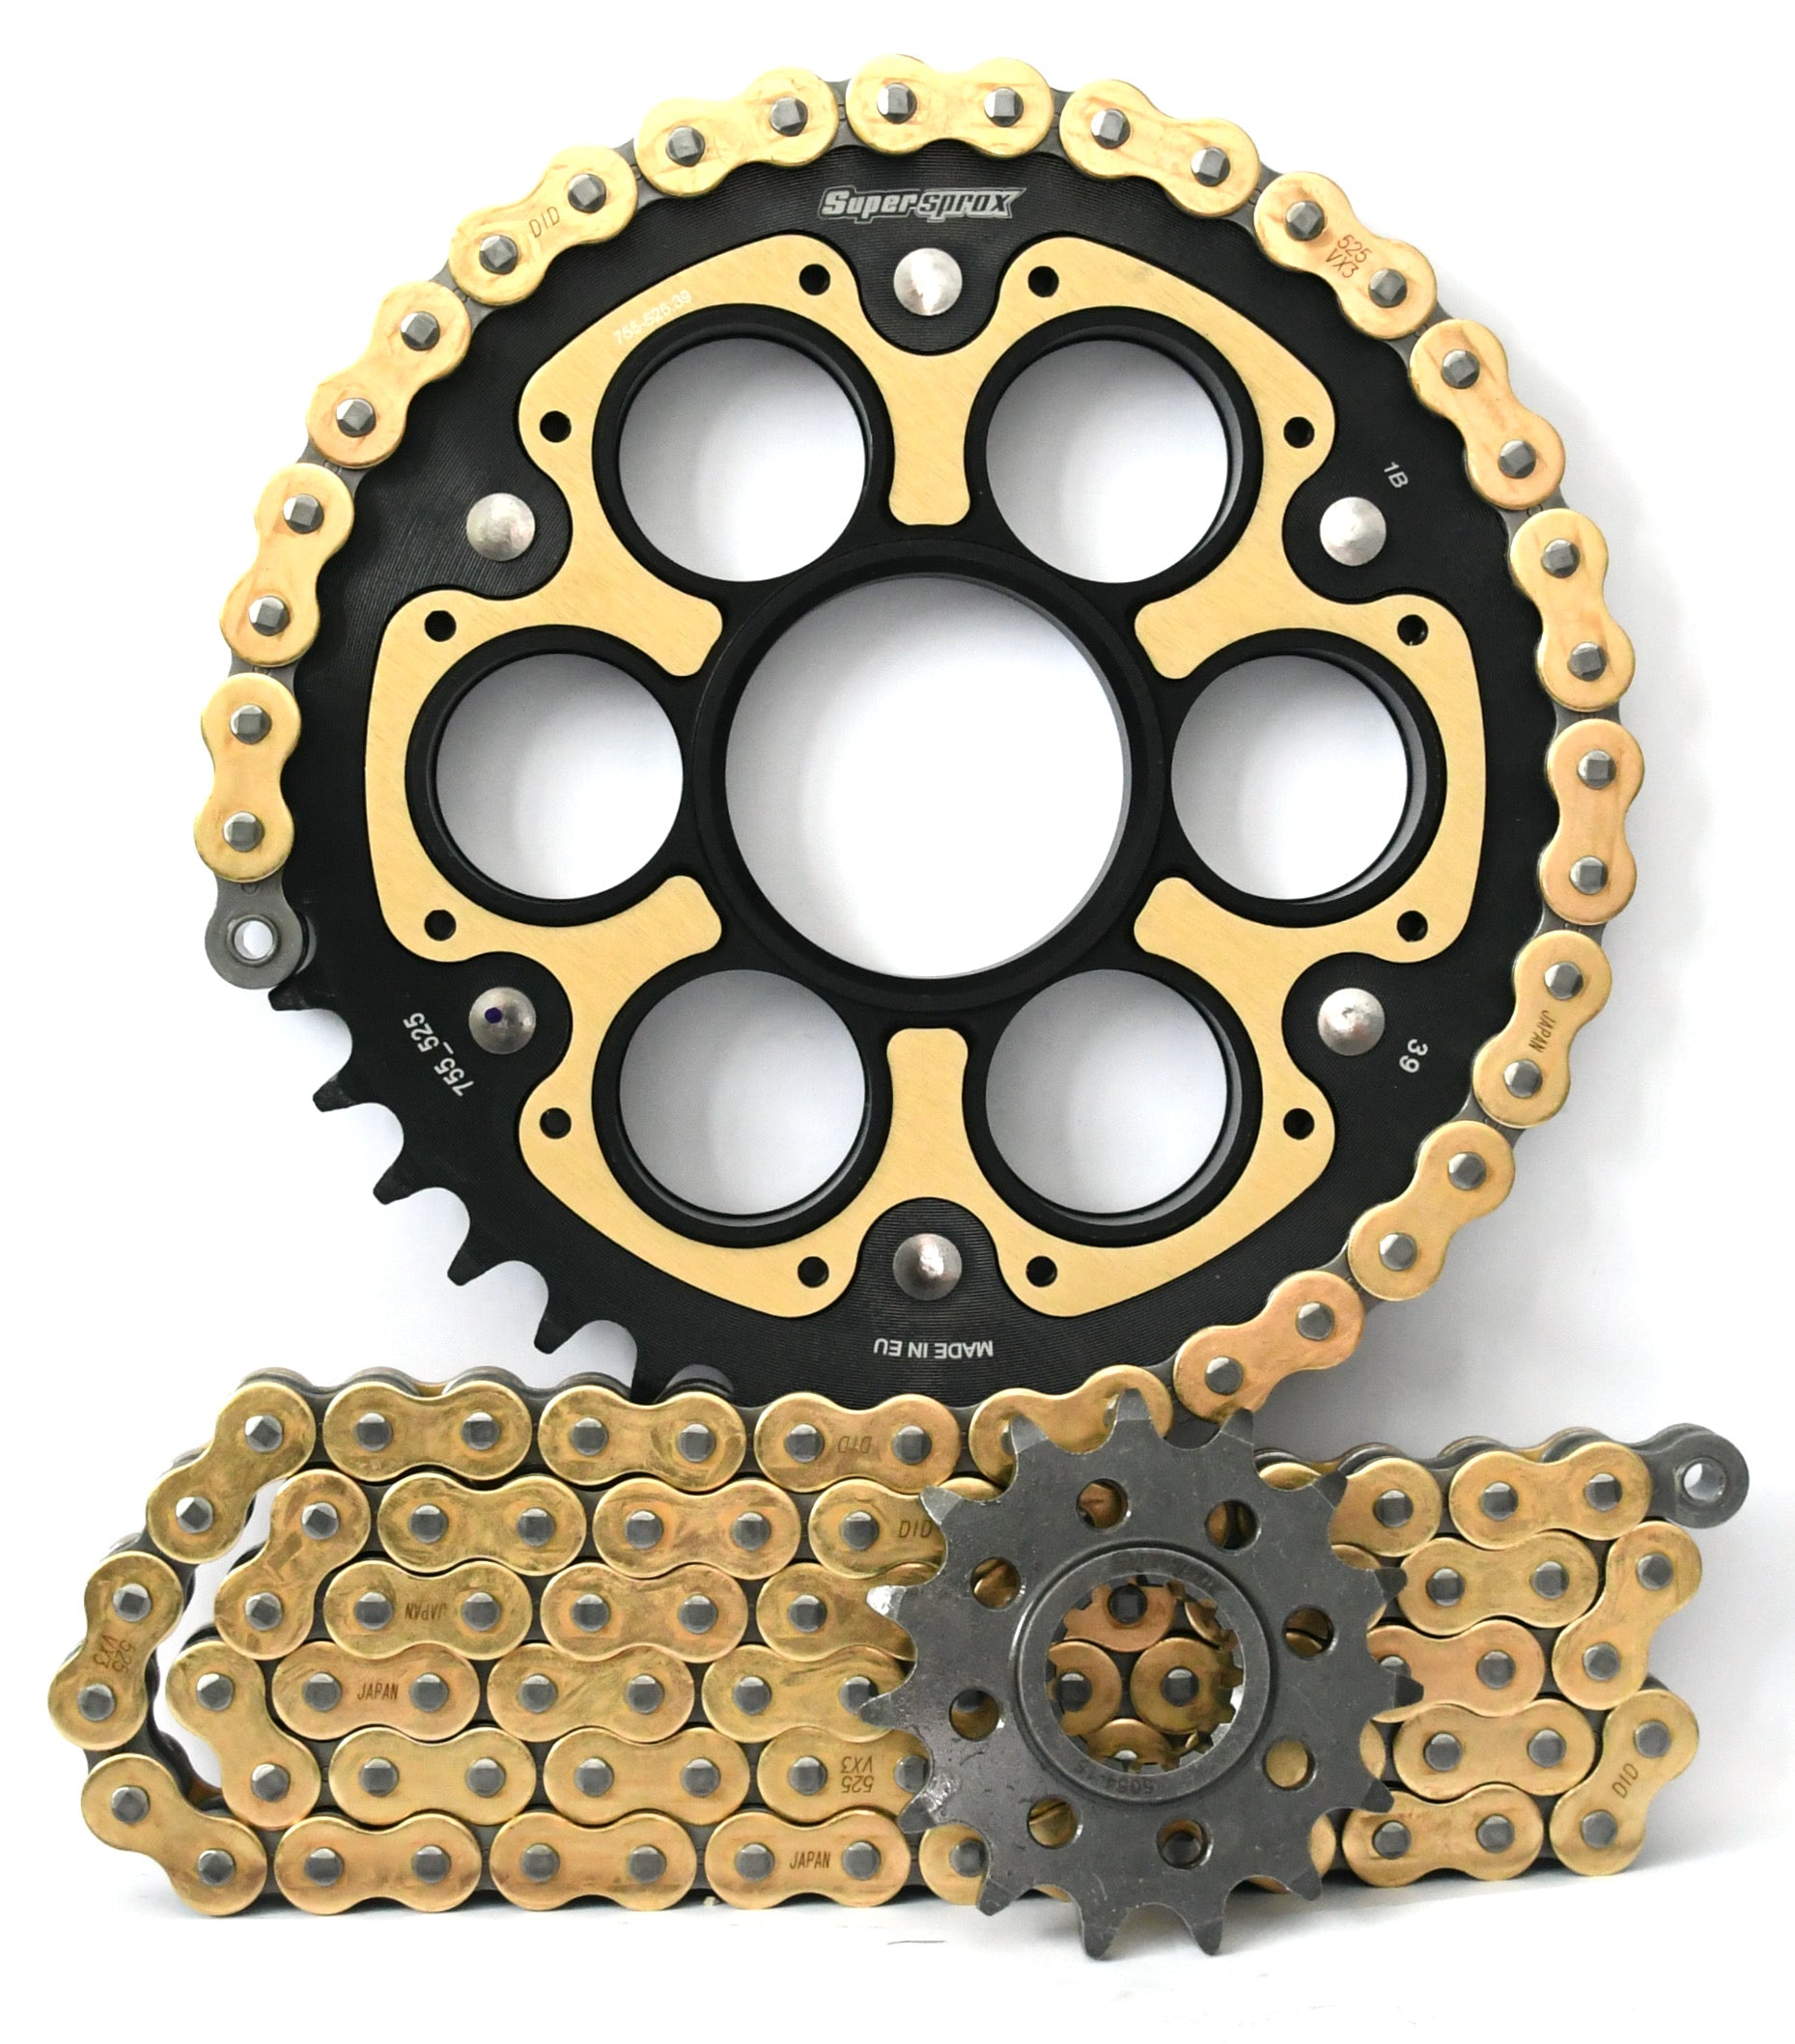 Supersprox Chain & Sprocket Kit for Ducati Panigale - Choose Your Gearing